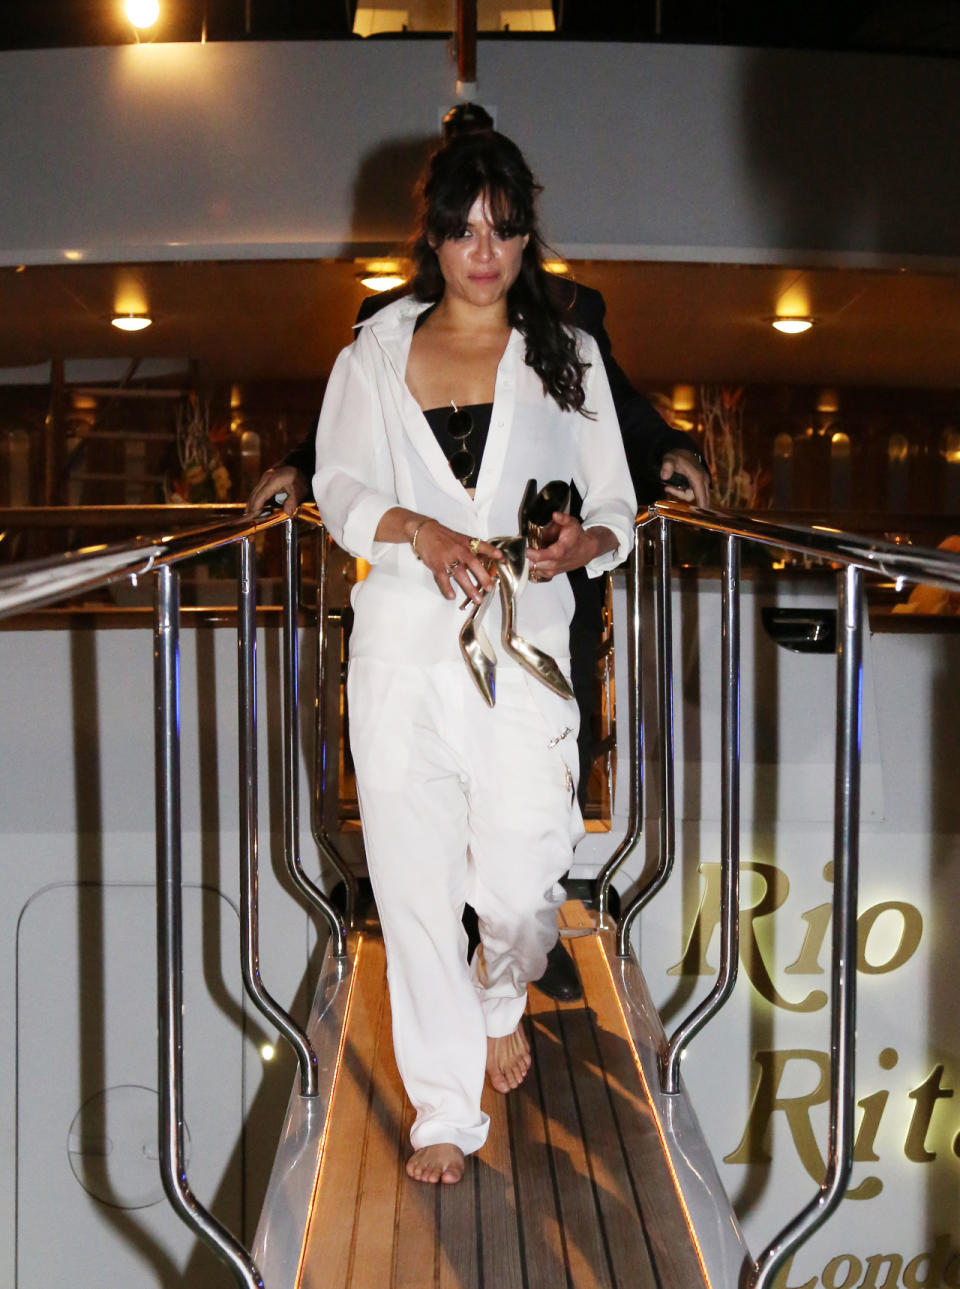 The Fast & Furious actress wears a white jumpsuit that looks more Nascar than yacht. But she does pair it with metallic pumps and John Lennon-like sunglasses, which is 100% fashion.  